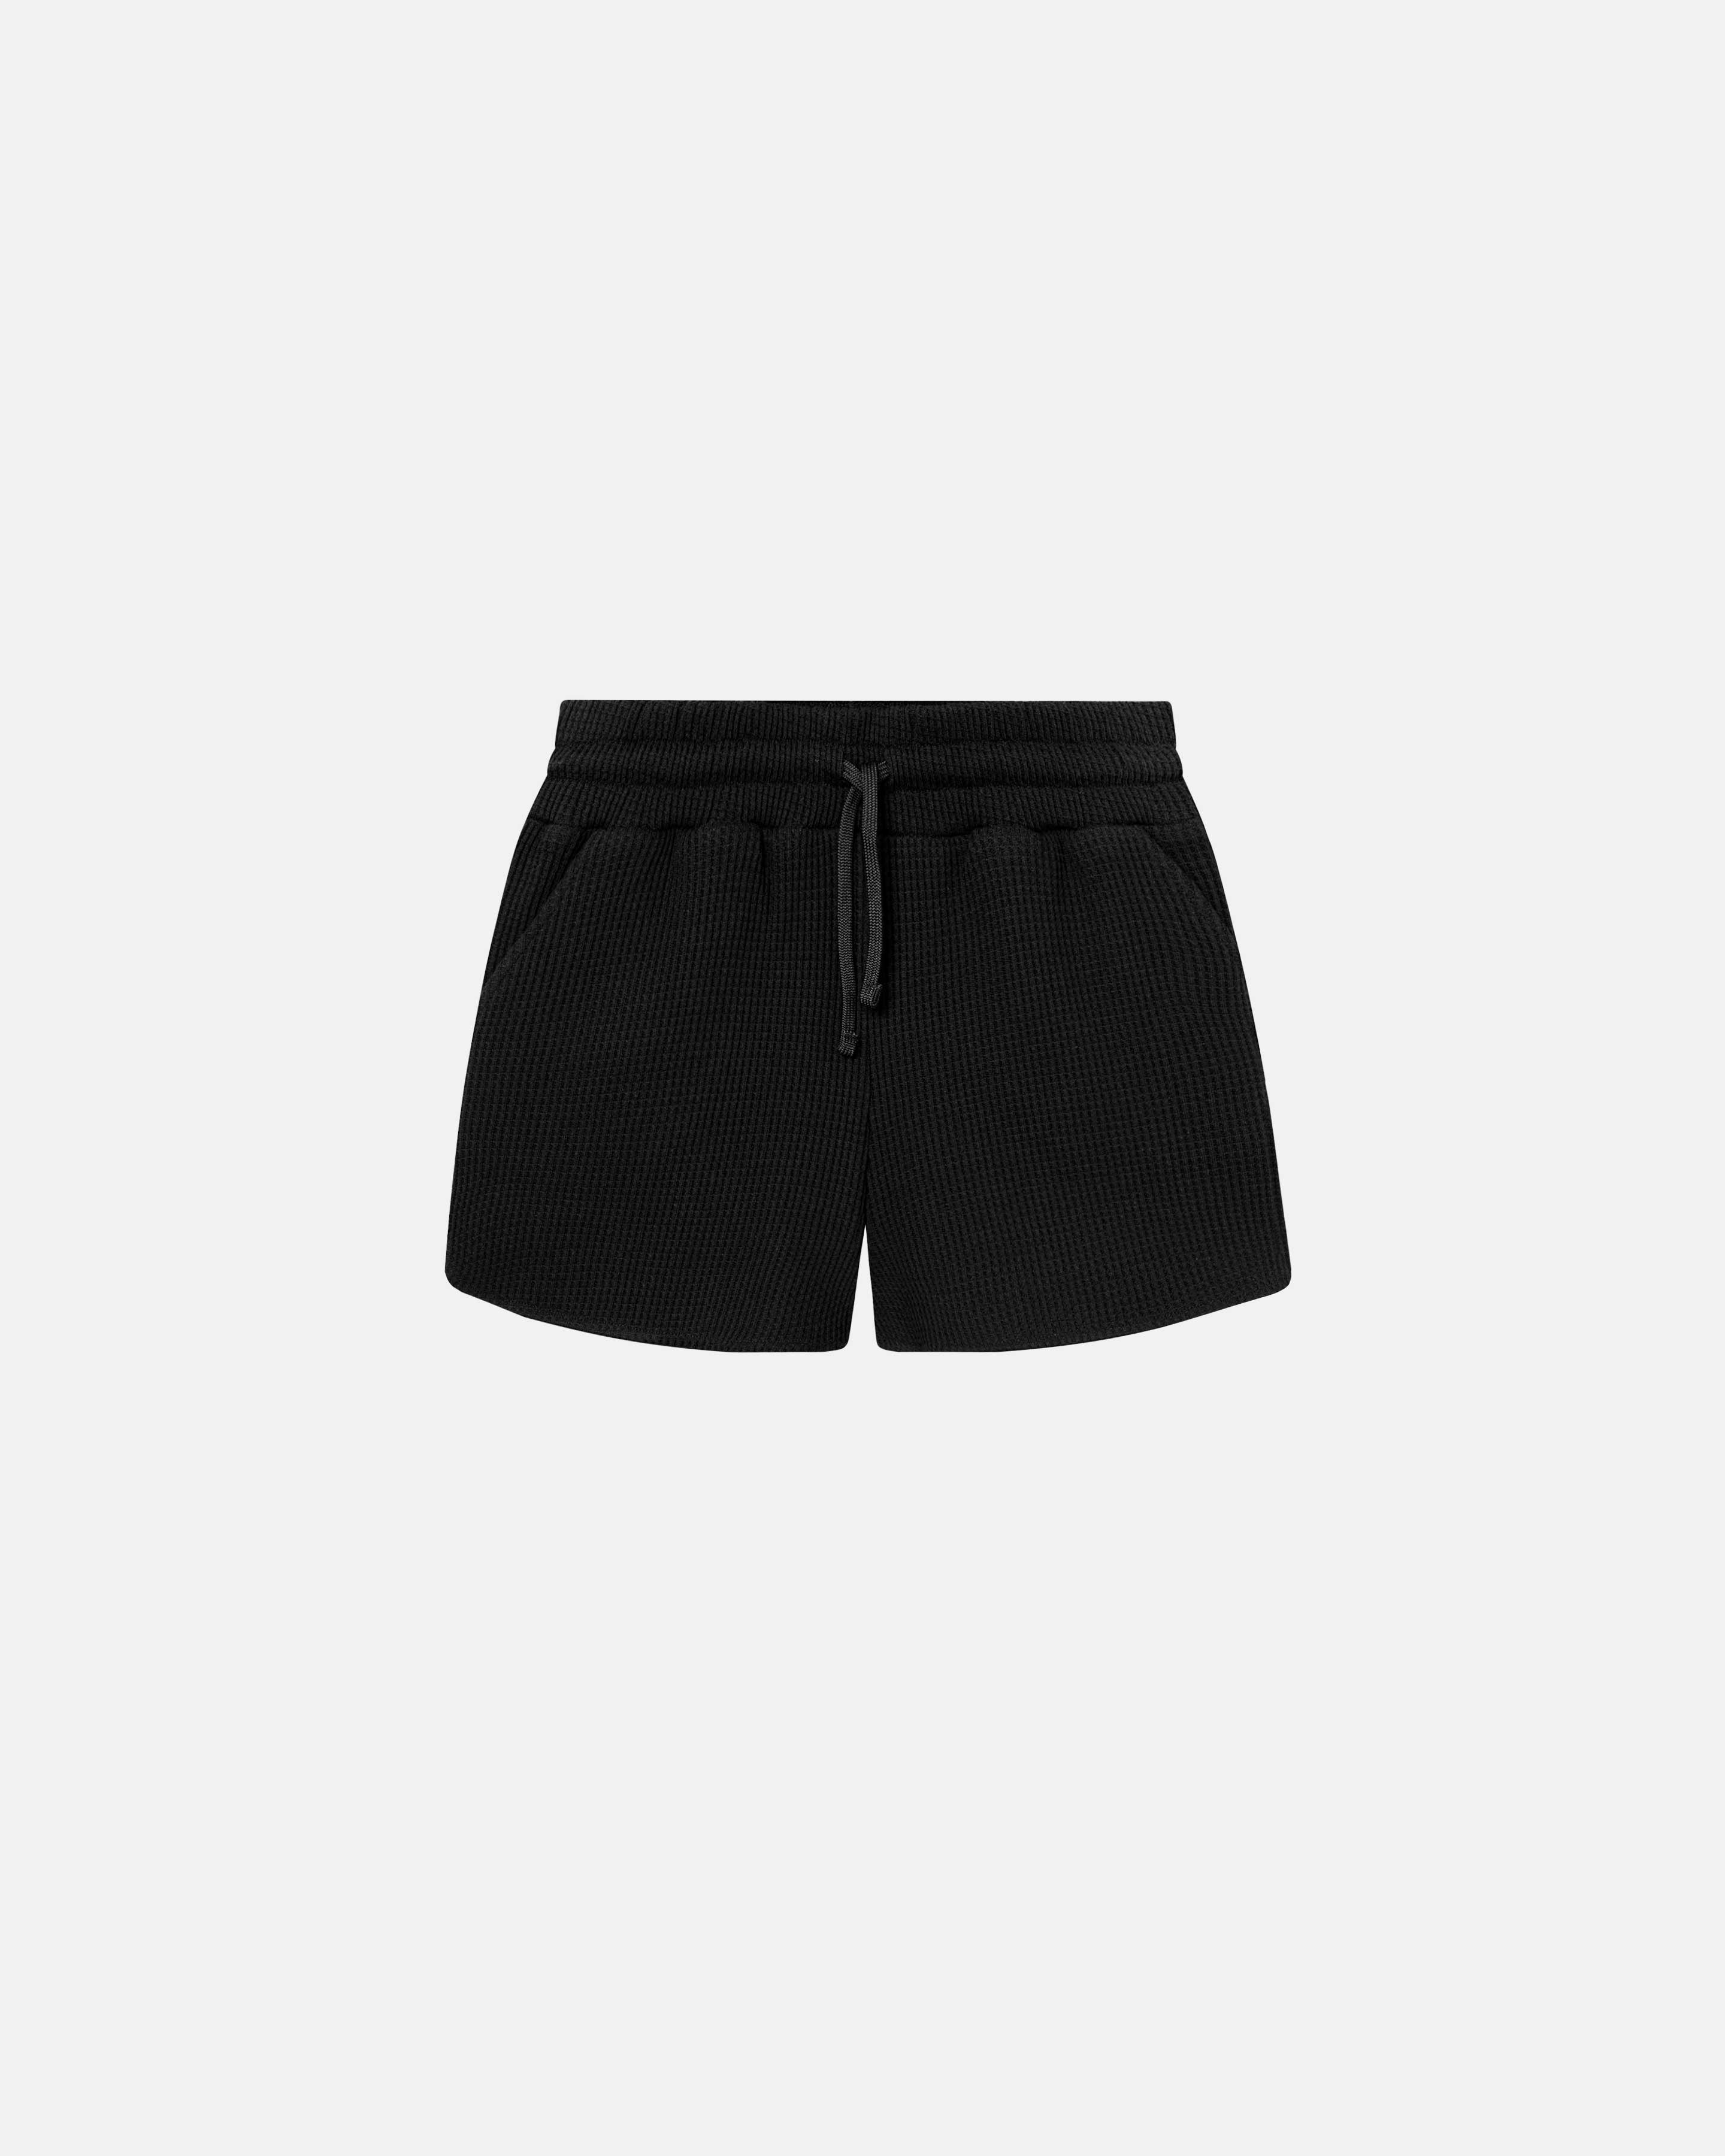 Black short length shorts with drawstring and two side pockets